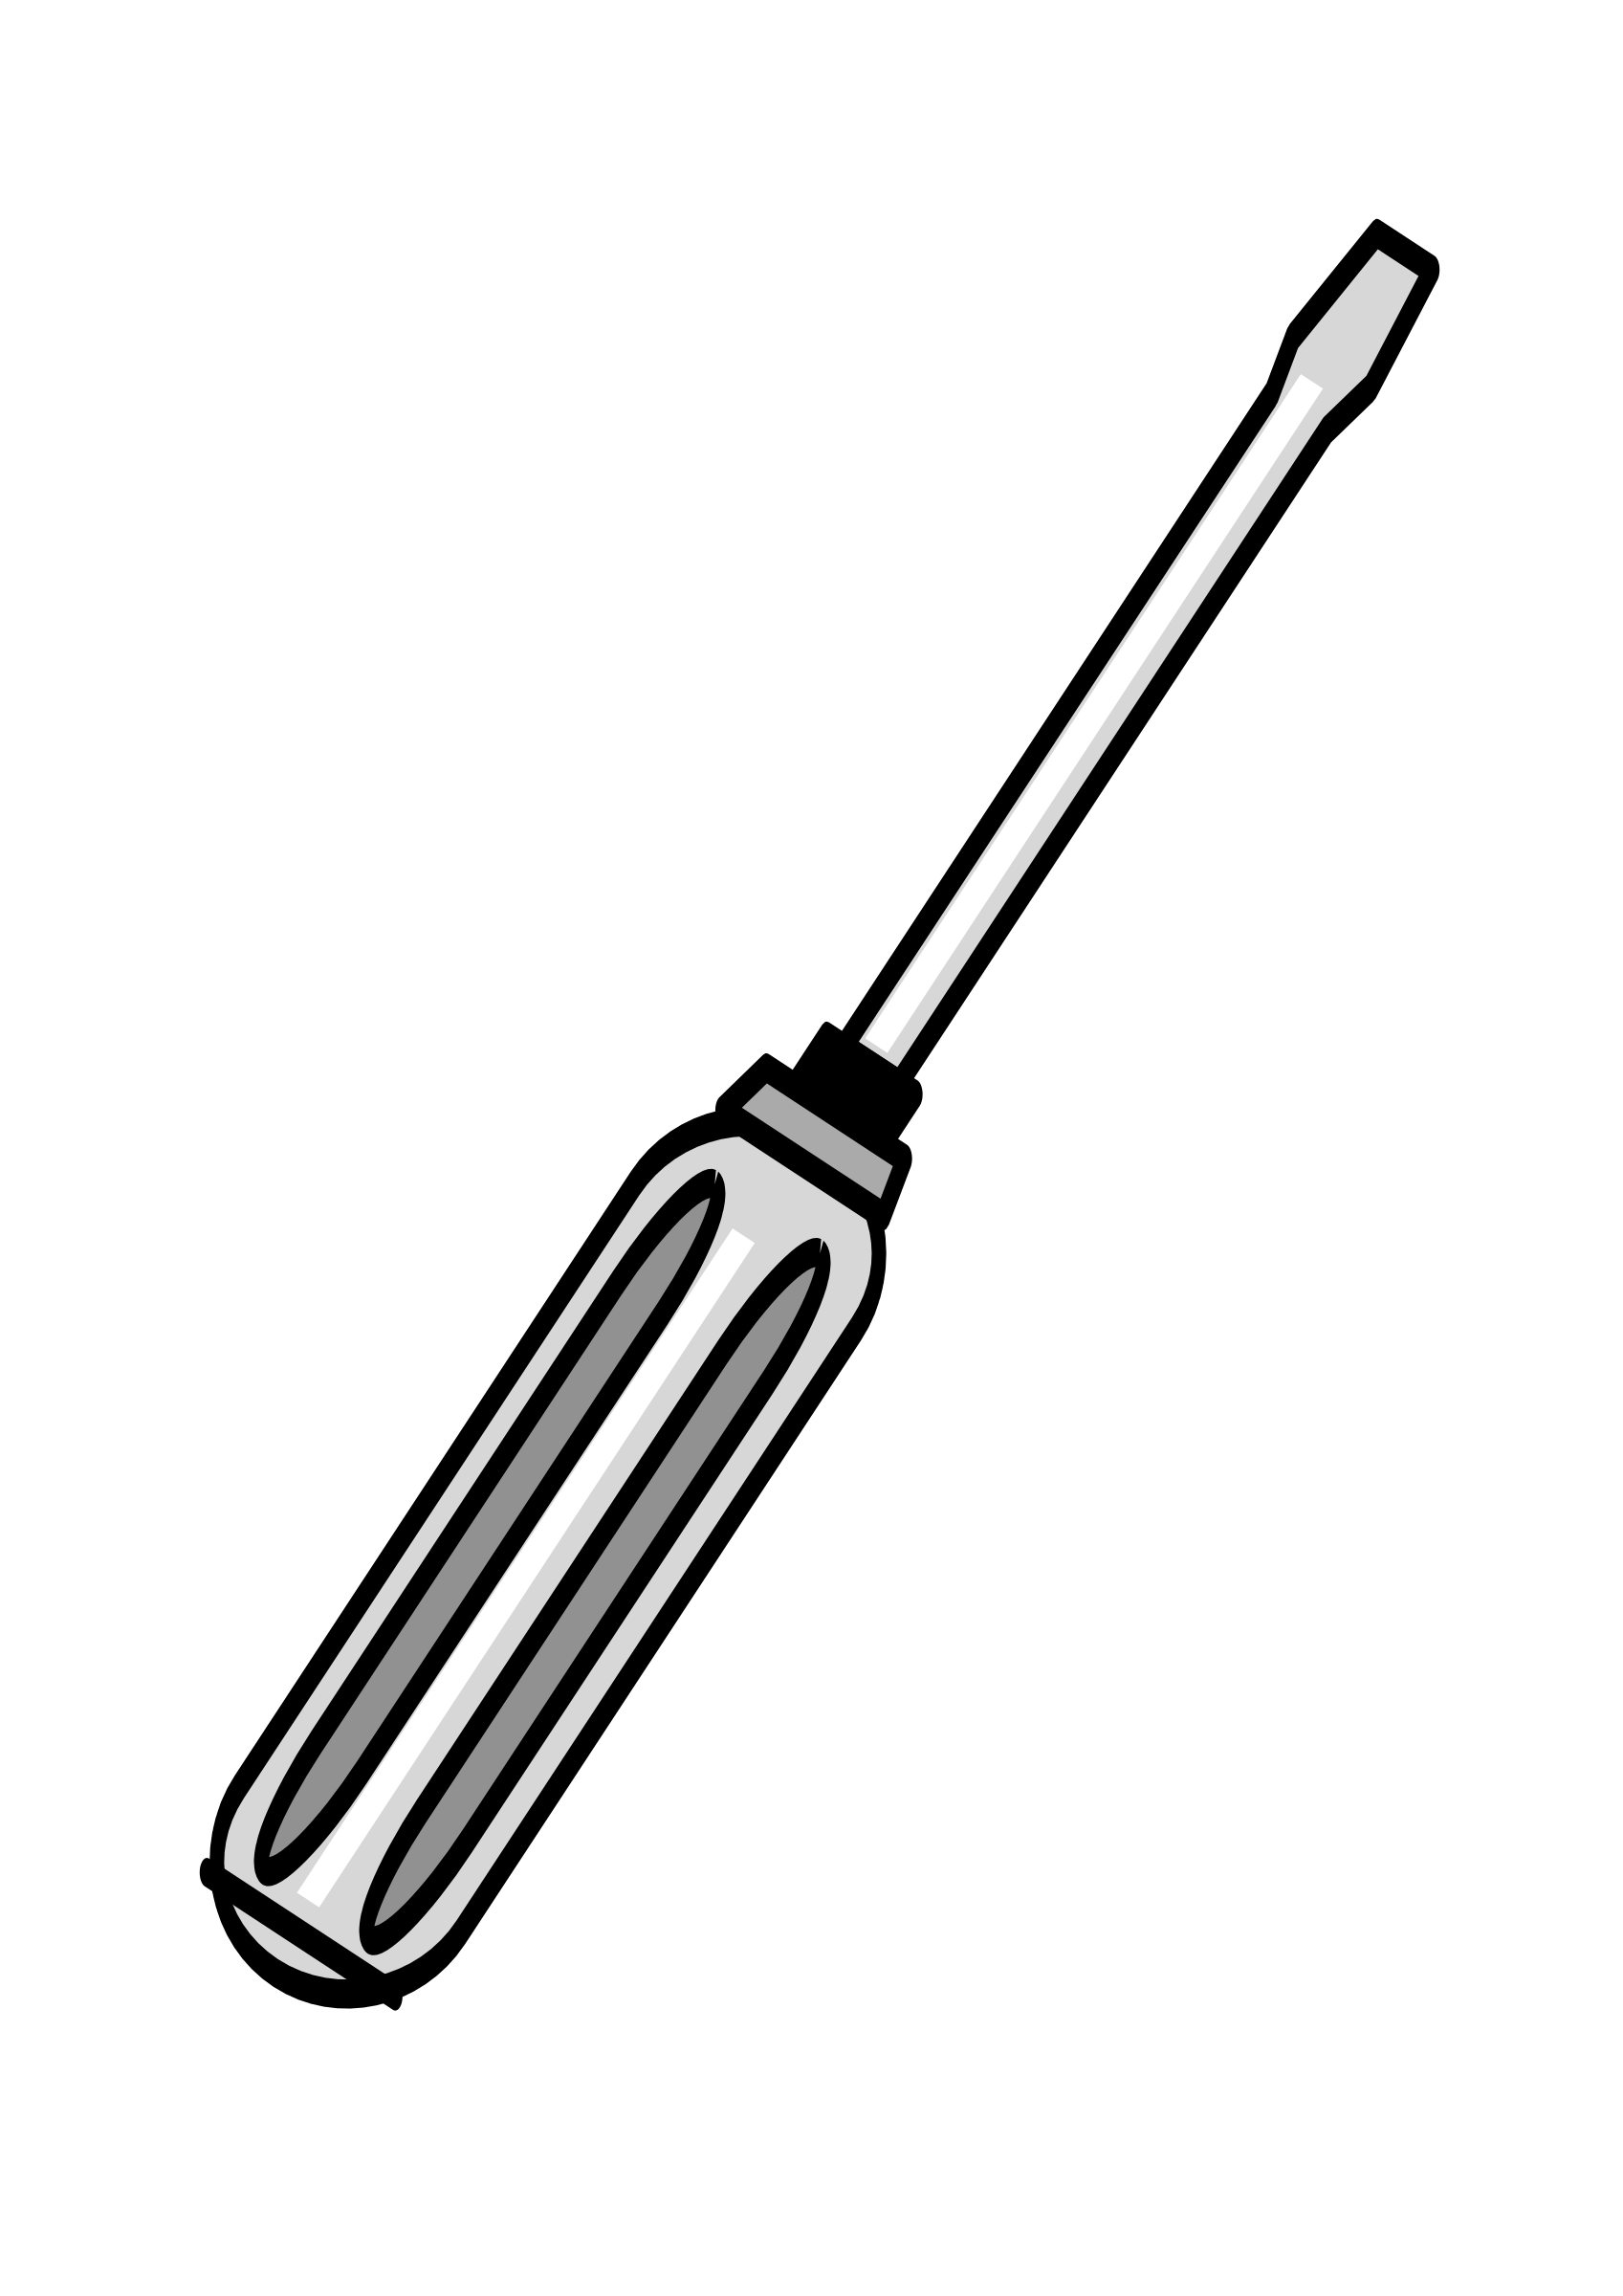 Screwdriver clipart black and white. Iss activity sheet p